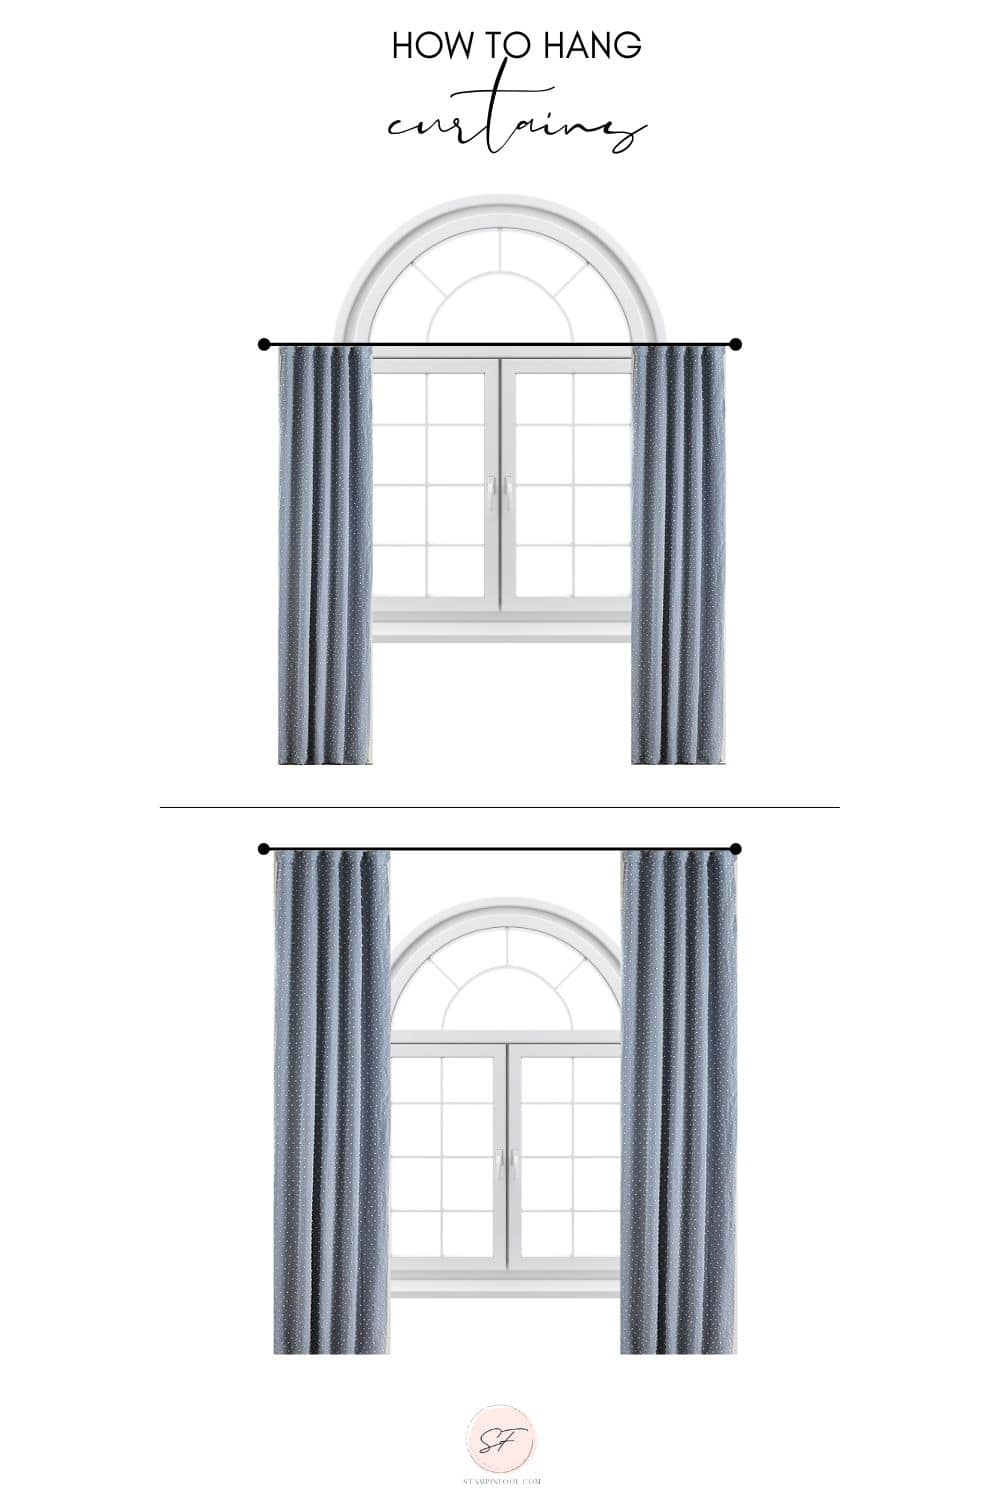 How to hang curtains arched window 4